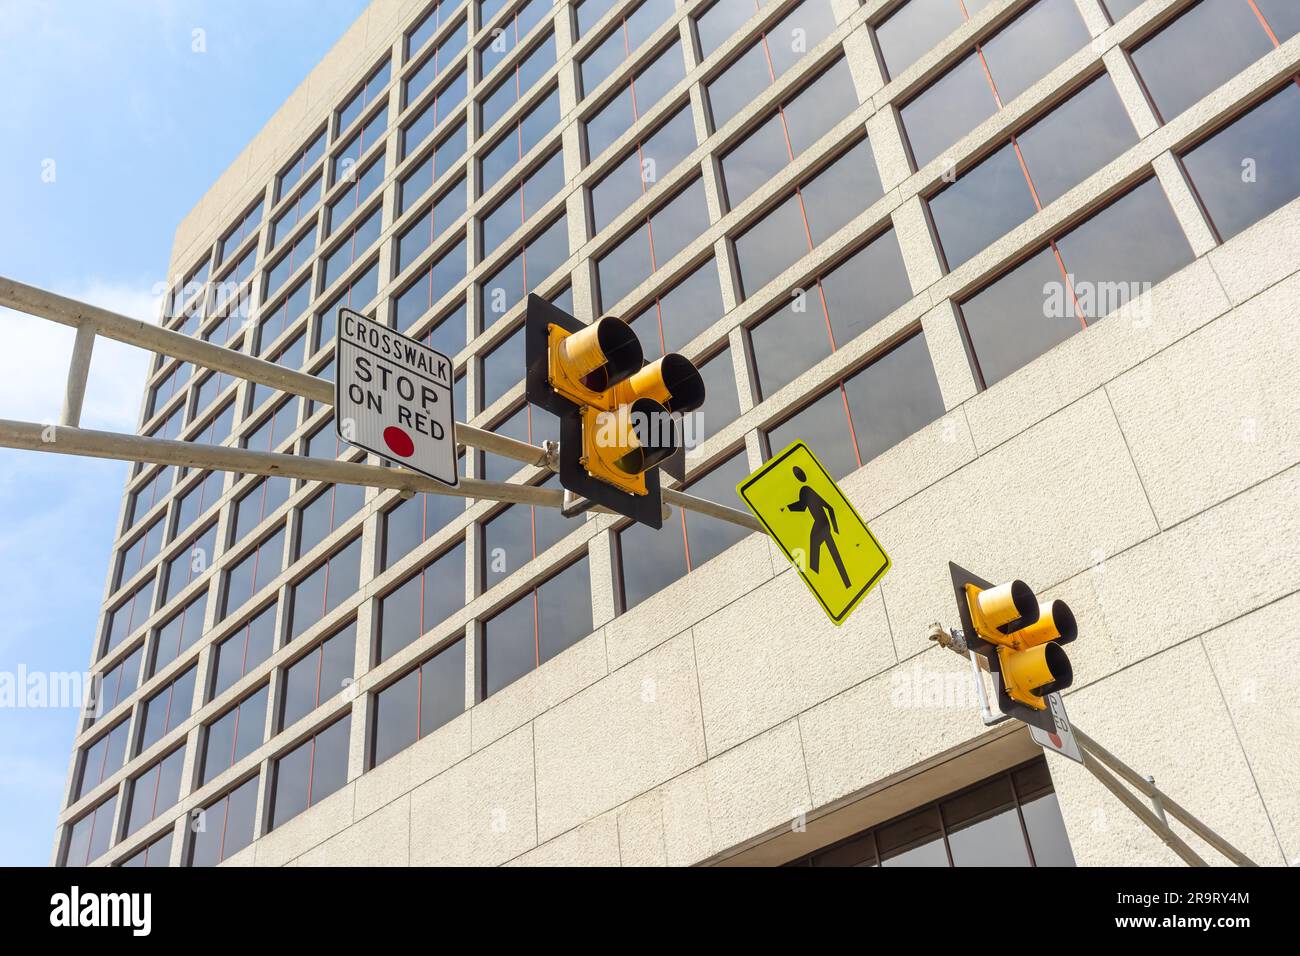 Low angle view of a pedestrian crosswalk traffic signal lights in a city Stock Photo